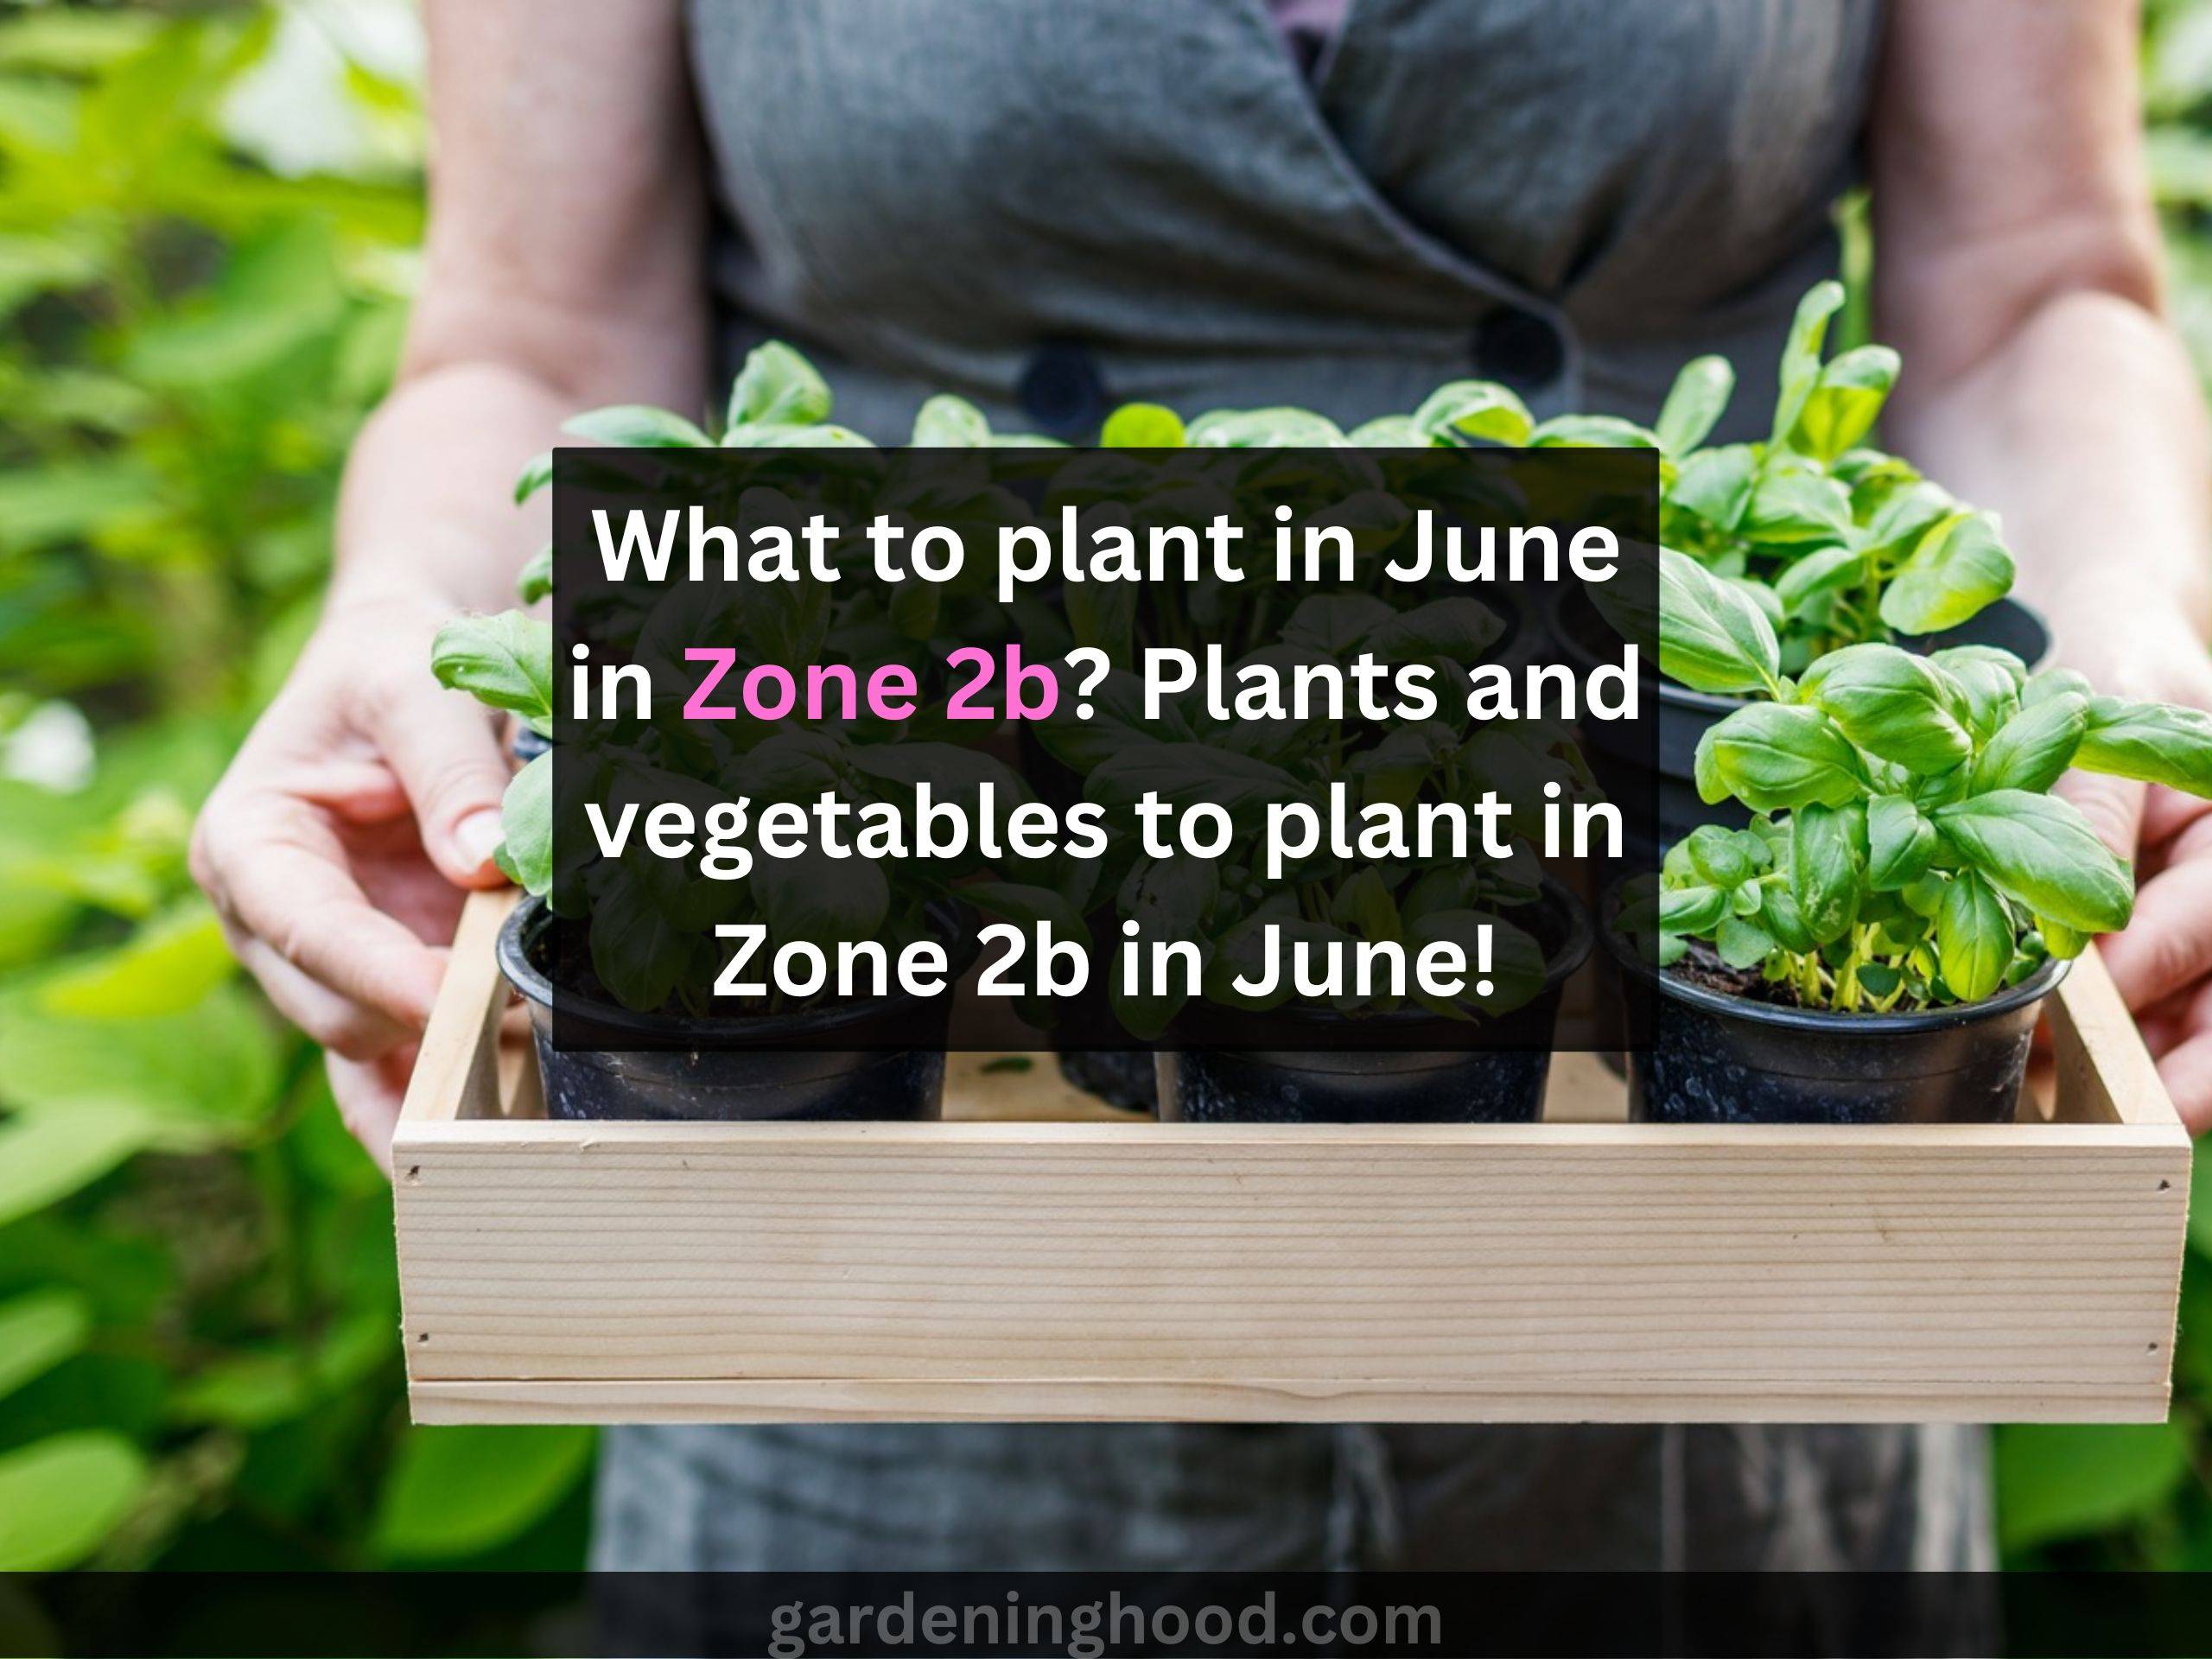 What to plant in June in Zone 2b? Plants and vegetables to plant in Zone 2b in June!